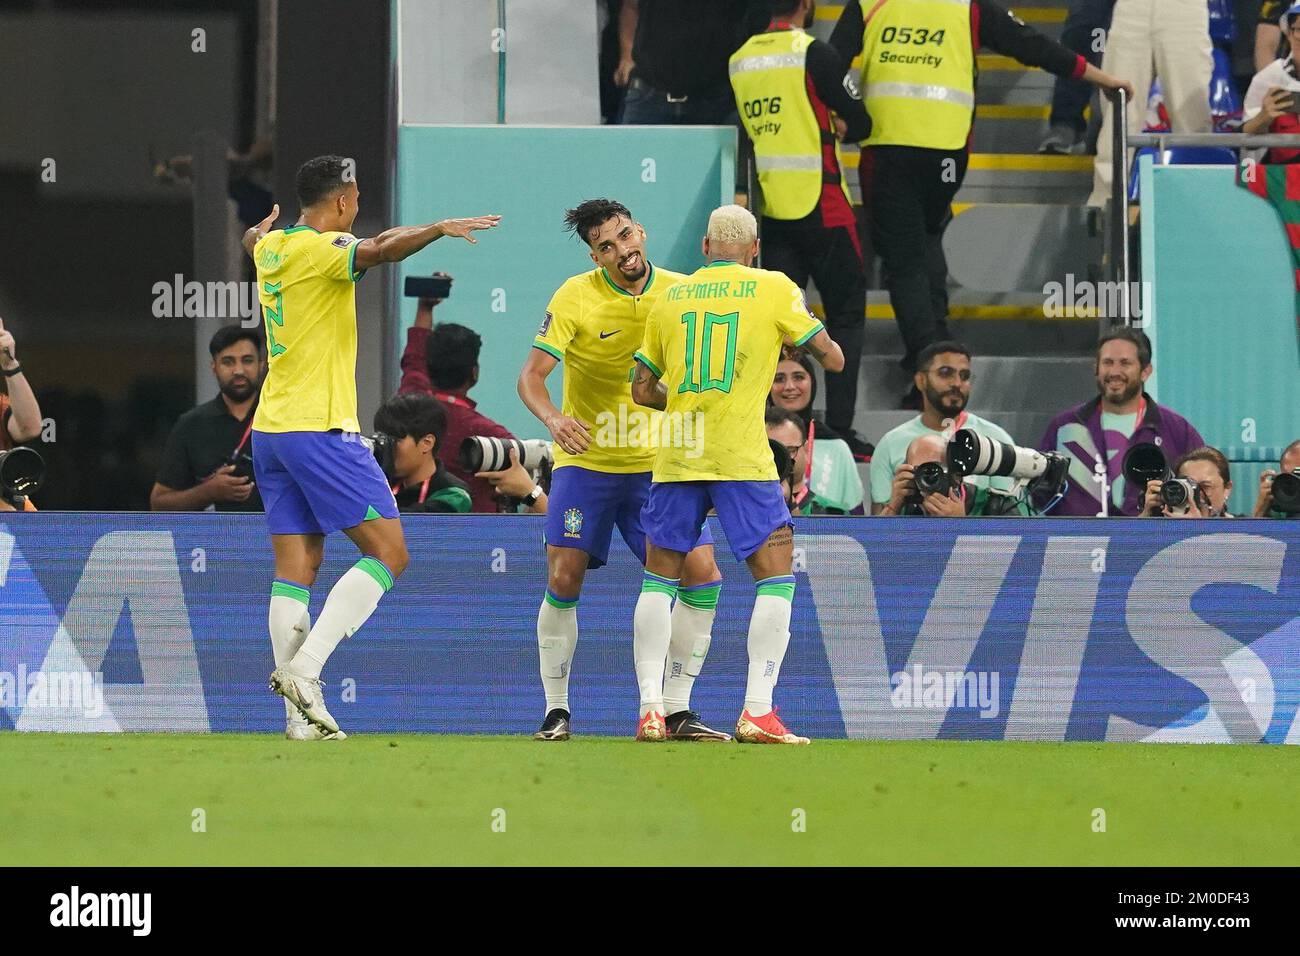 DOHA, QATAR - DECEMBER 5: Player of Brazil Lucas Paquetá celebrates with his teammates Danilo and Neymar after scoring a goal during the FIFA World Cup Qatar 2022 Round of 16 match between Brazil and South Korea at Stadium 974 on December 5, 2022 in Doha, Qatar. (Photo by Florencia Tan Jun/PxImages) Stock Photo